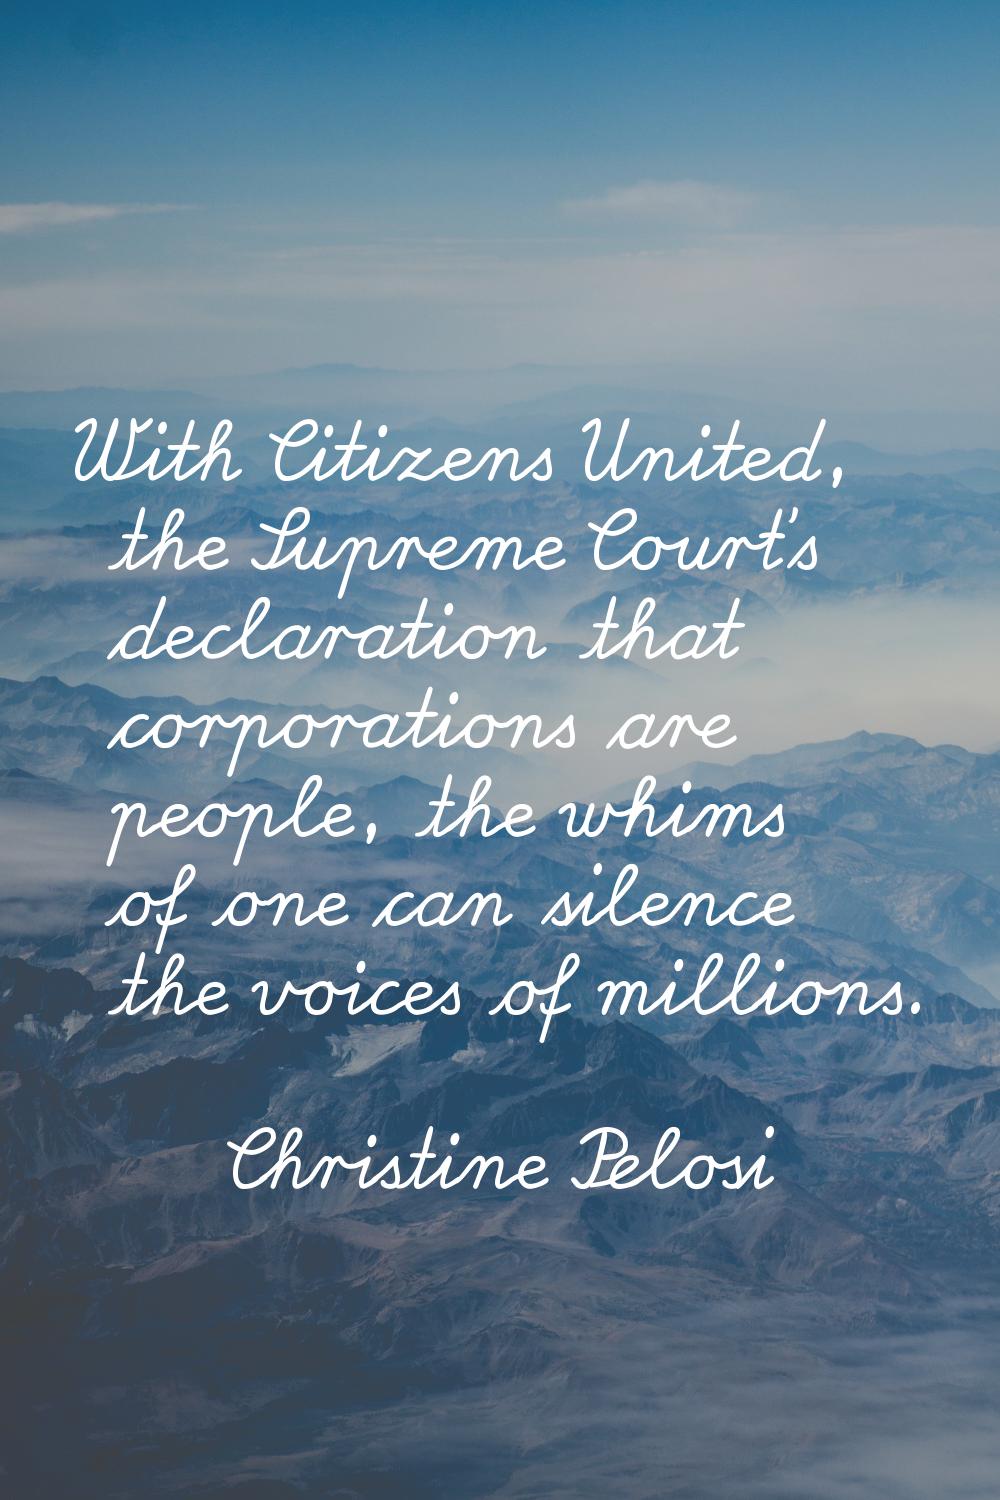 With Citizens United, the Supreme Court's declaration that corporations are people, the whims of on